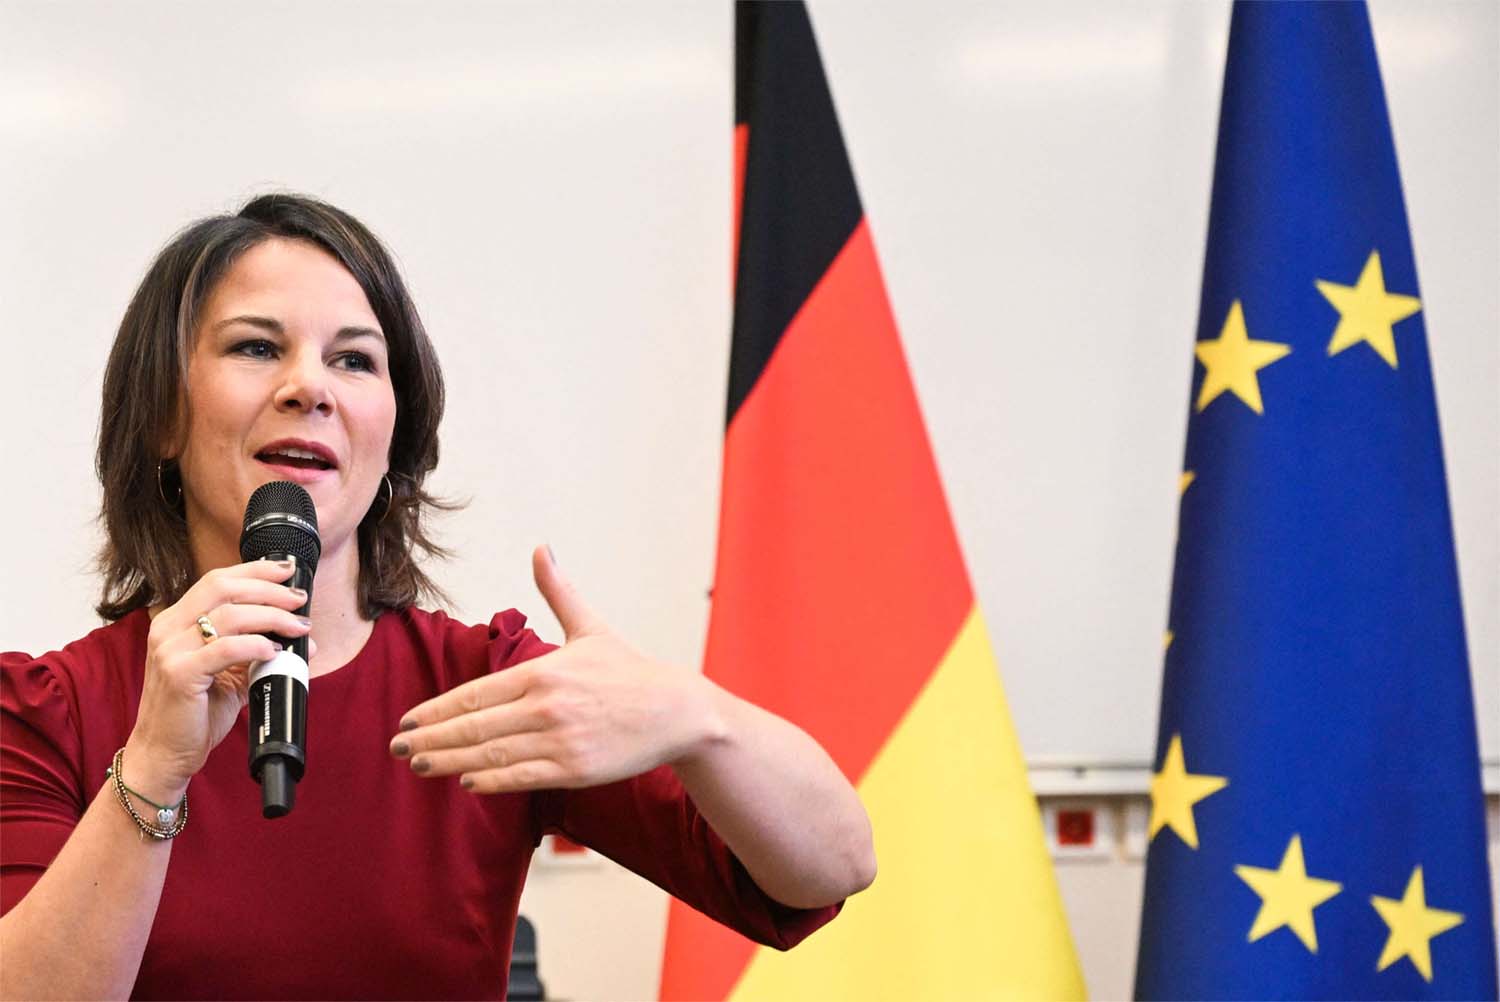 Germany's foreign minister Annalena Baerbock